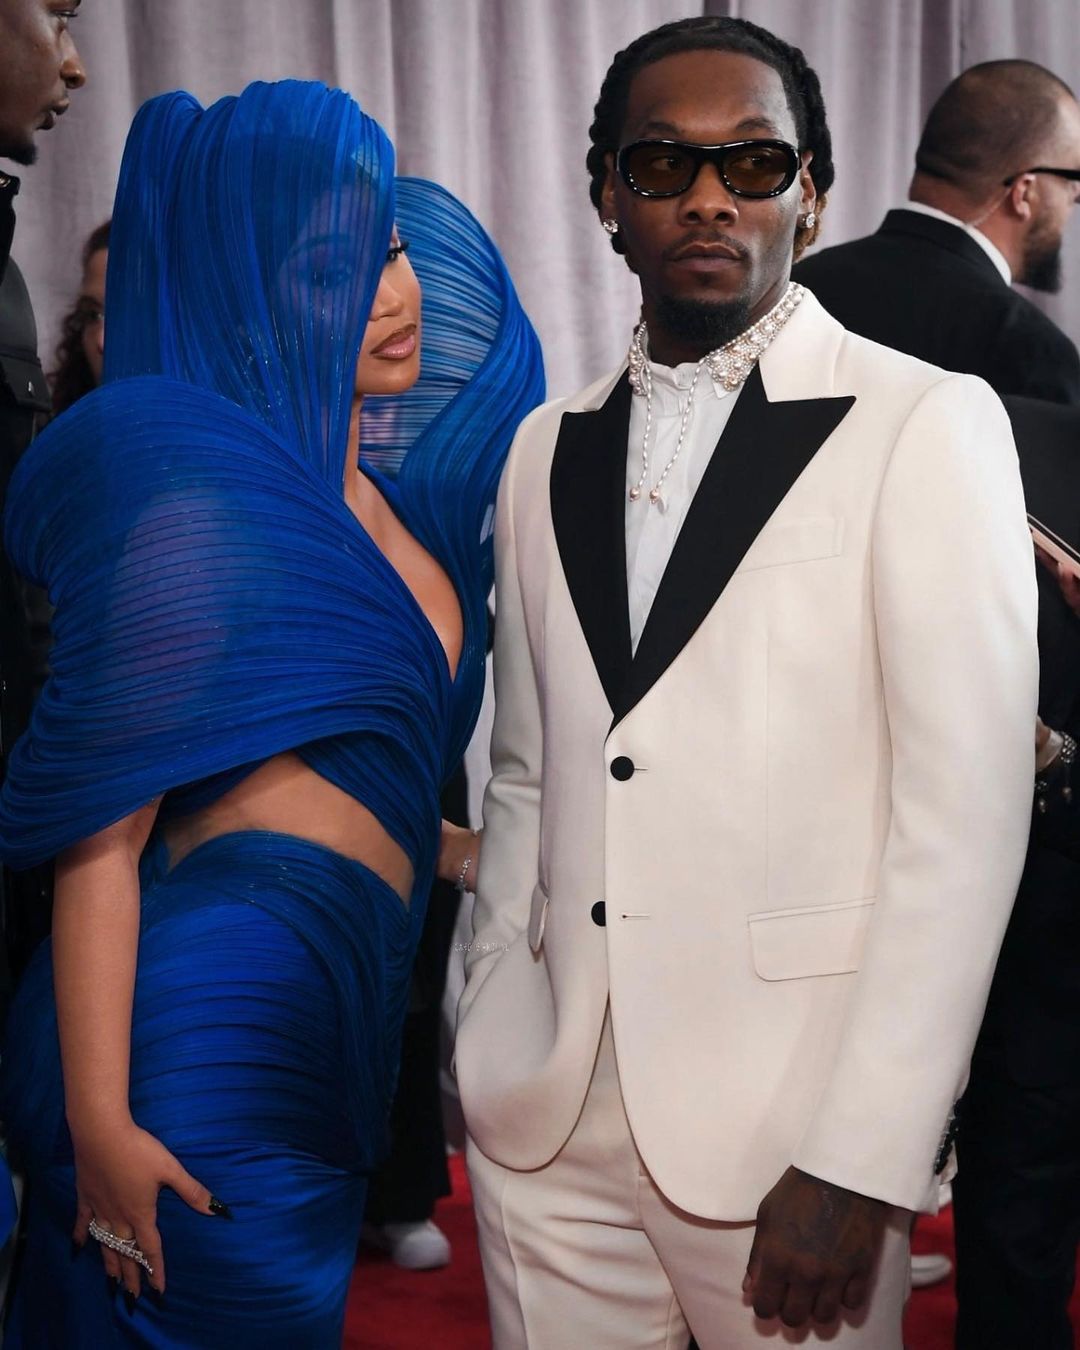 Cardi B Takes Center Stage In A Dramatic Blue Couture Dress